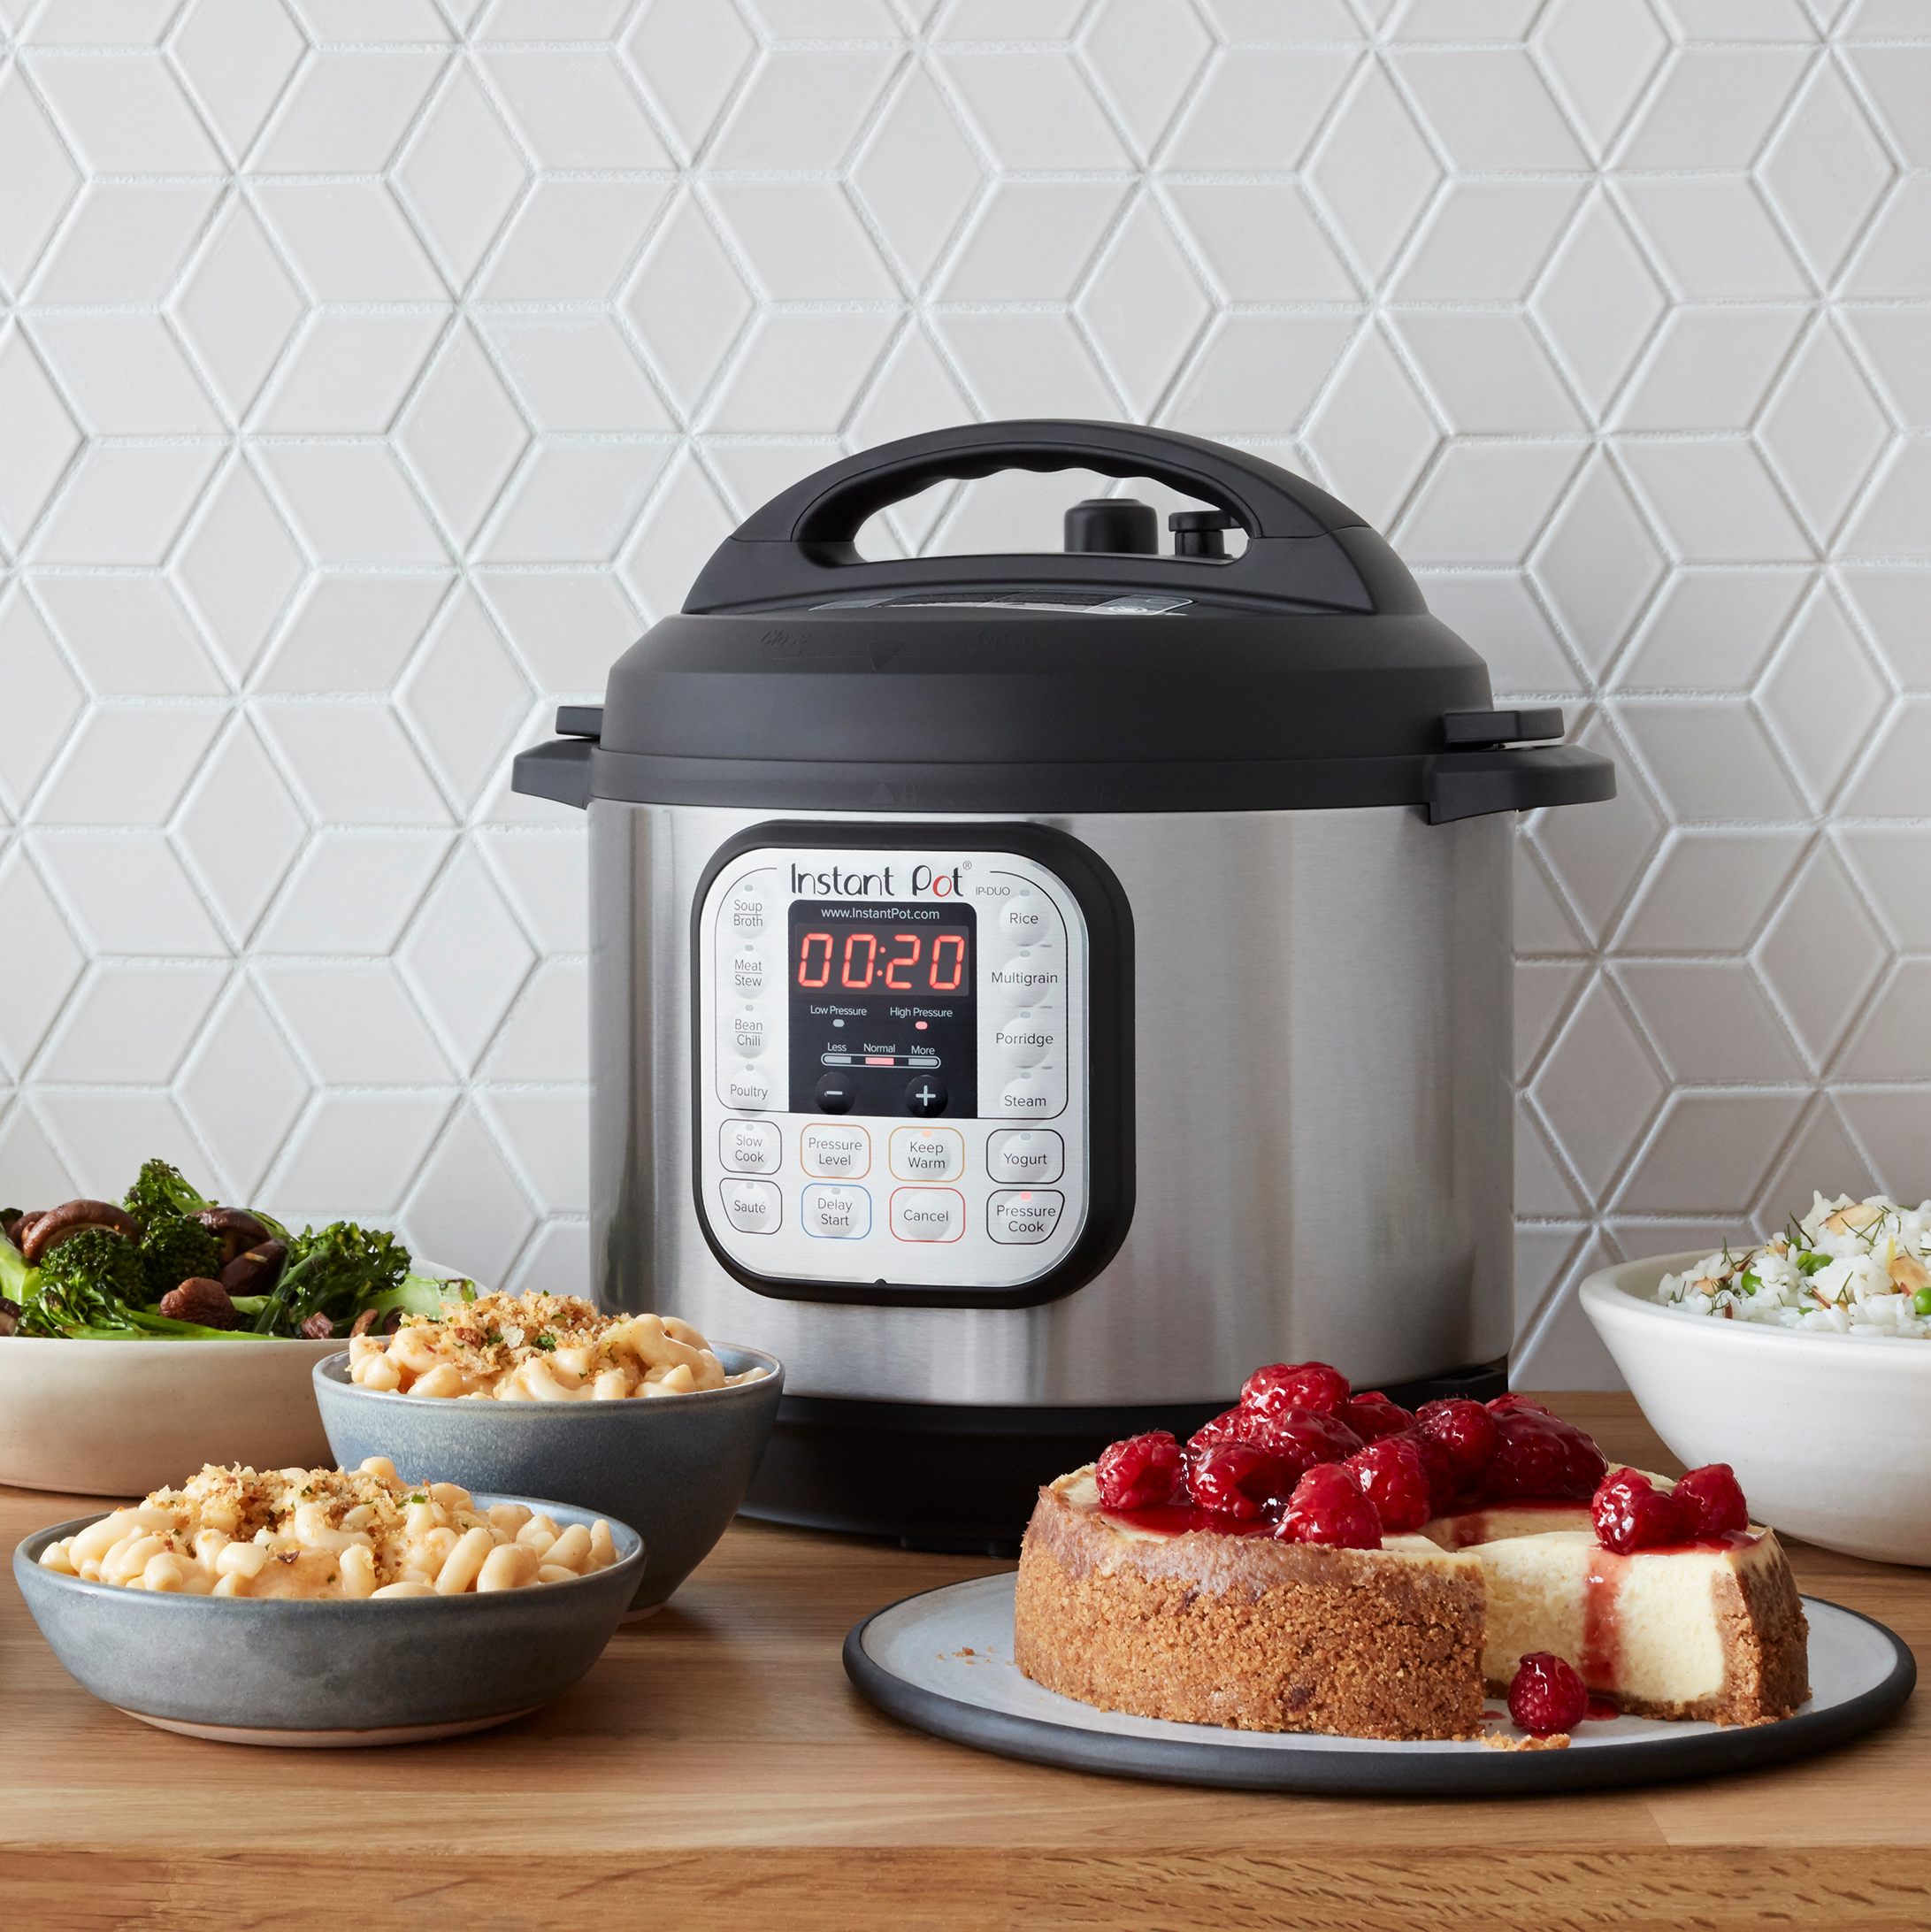 Instant Pot DUO80 8-Quart 7-in-1 Multi-Use Programmable Pressure Cooker, Slow Cooker, Rice Cooker, Sauté, Steamer, Yogurt Maker and Warmer